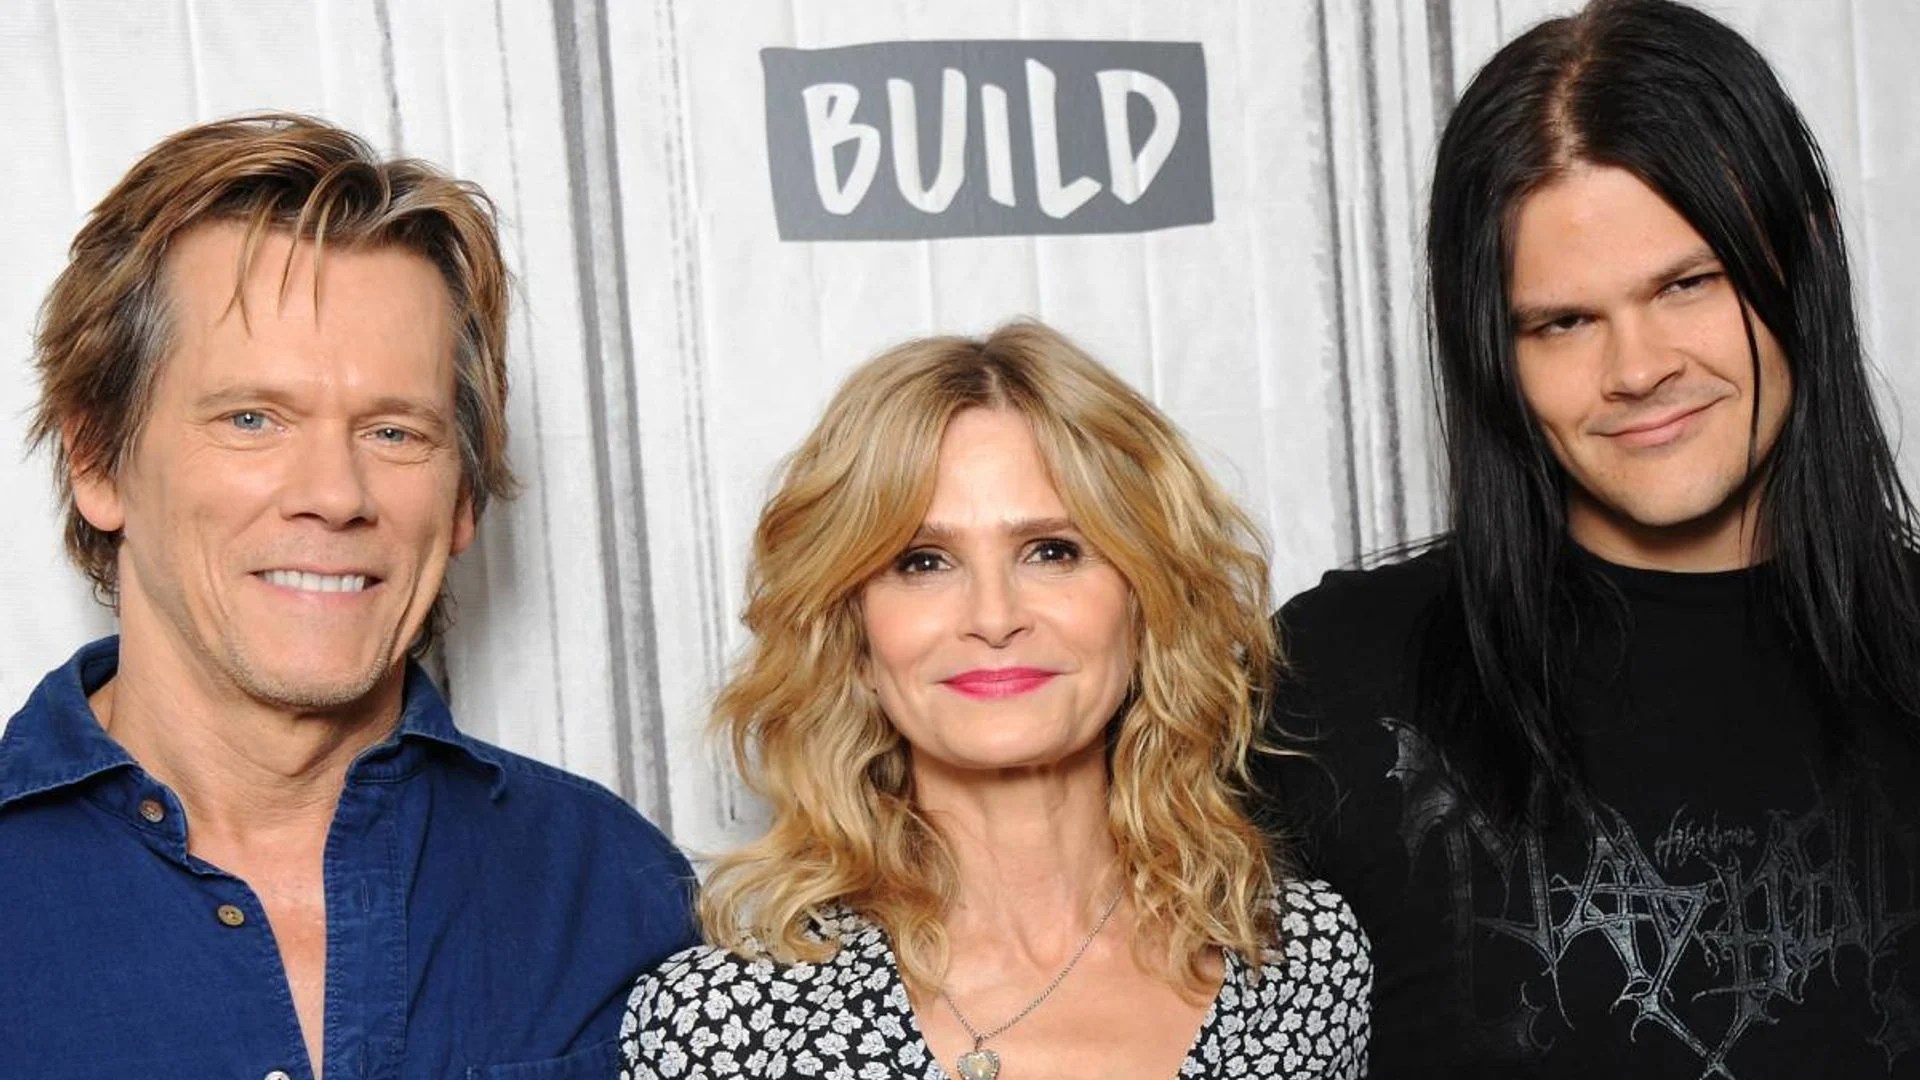 Kevin Bacon and Kyra Sedgwick's gothic son displays change in